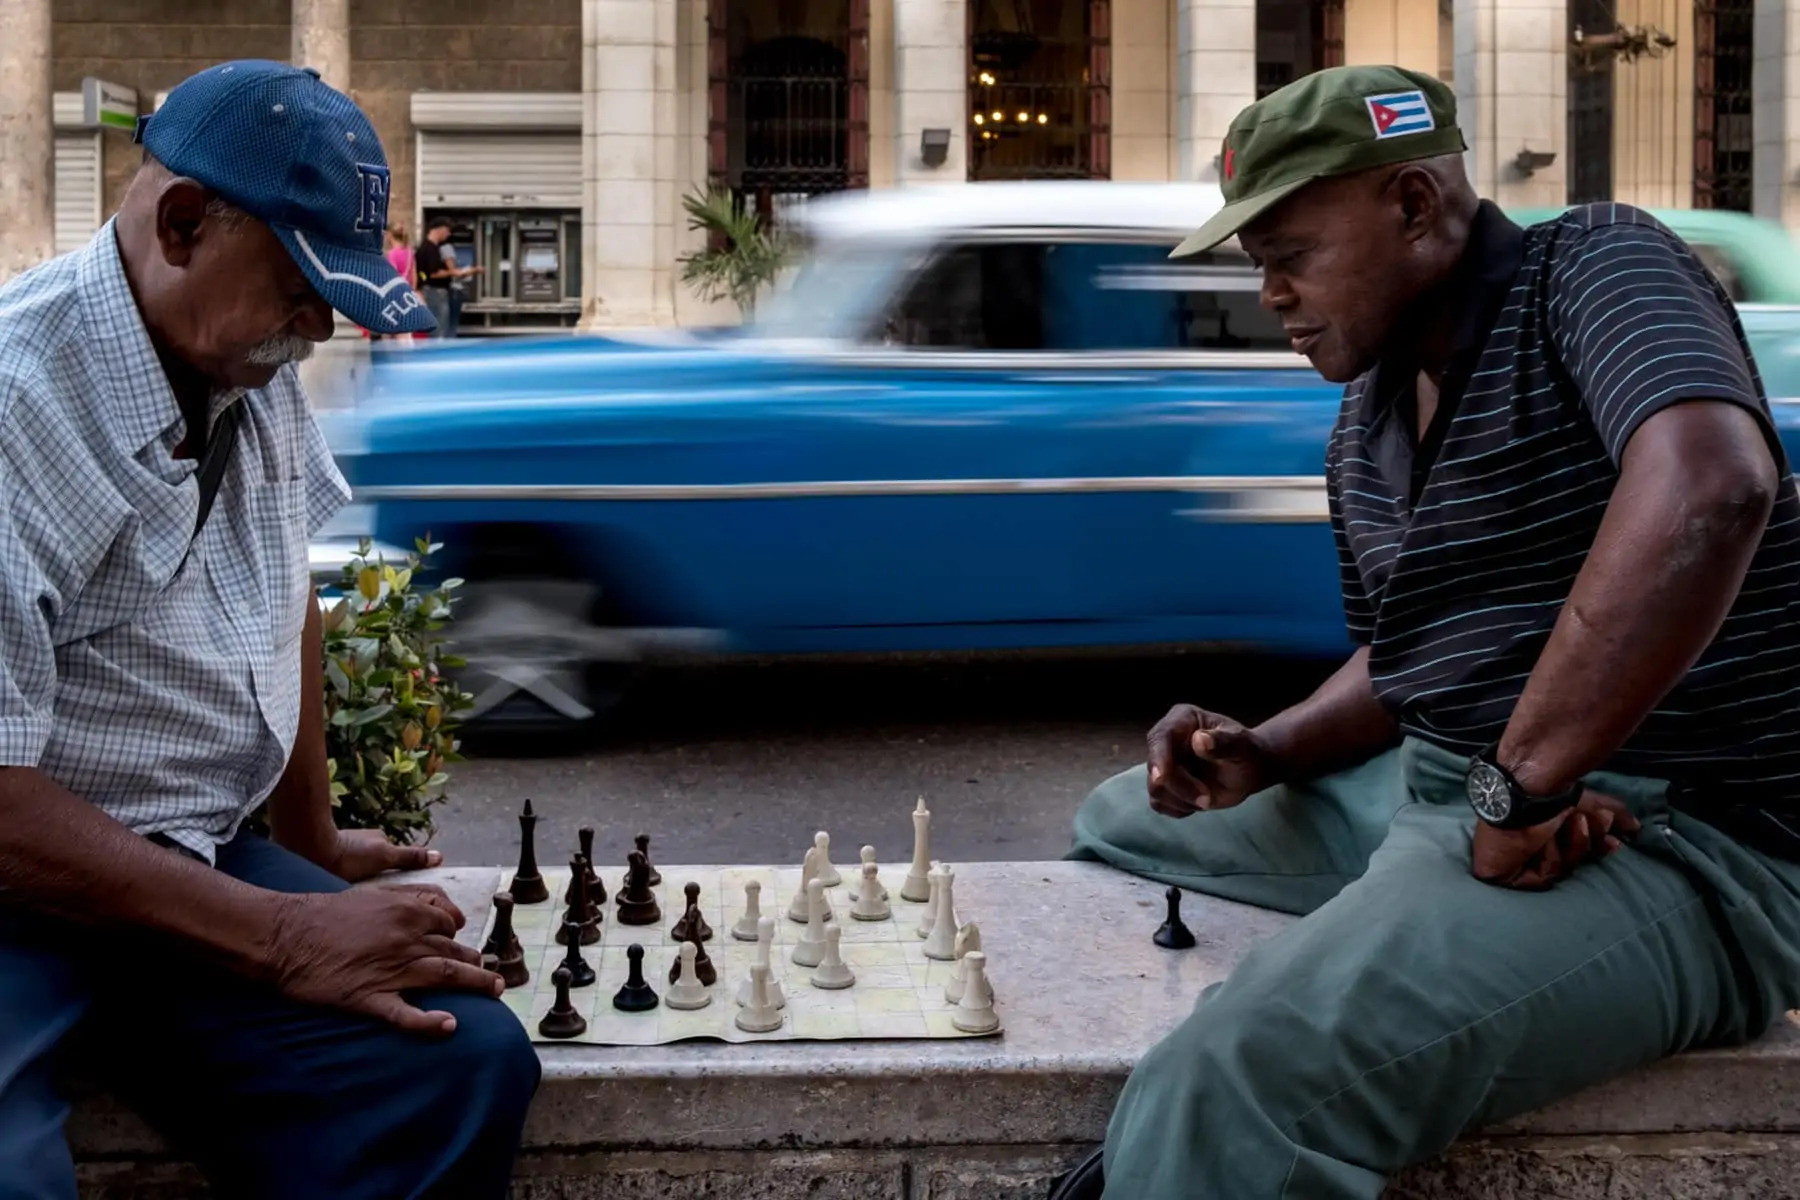 old men playing chess on the streets of Havana with blue Cuban car blurred in the background, taken by Havana street photographer Matt Badenoch